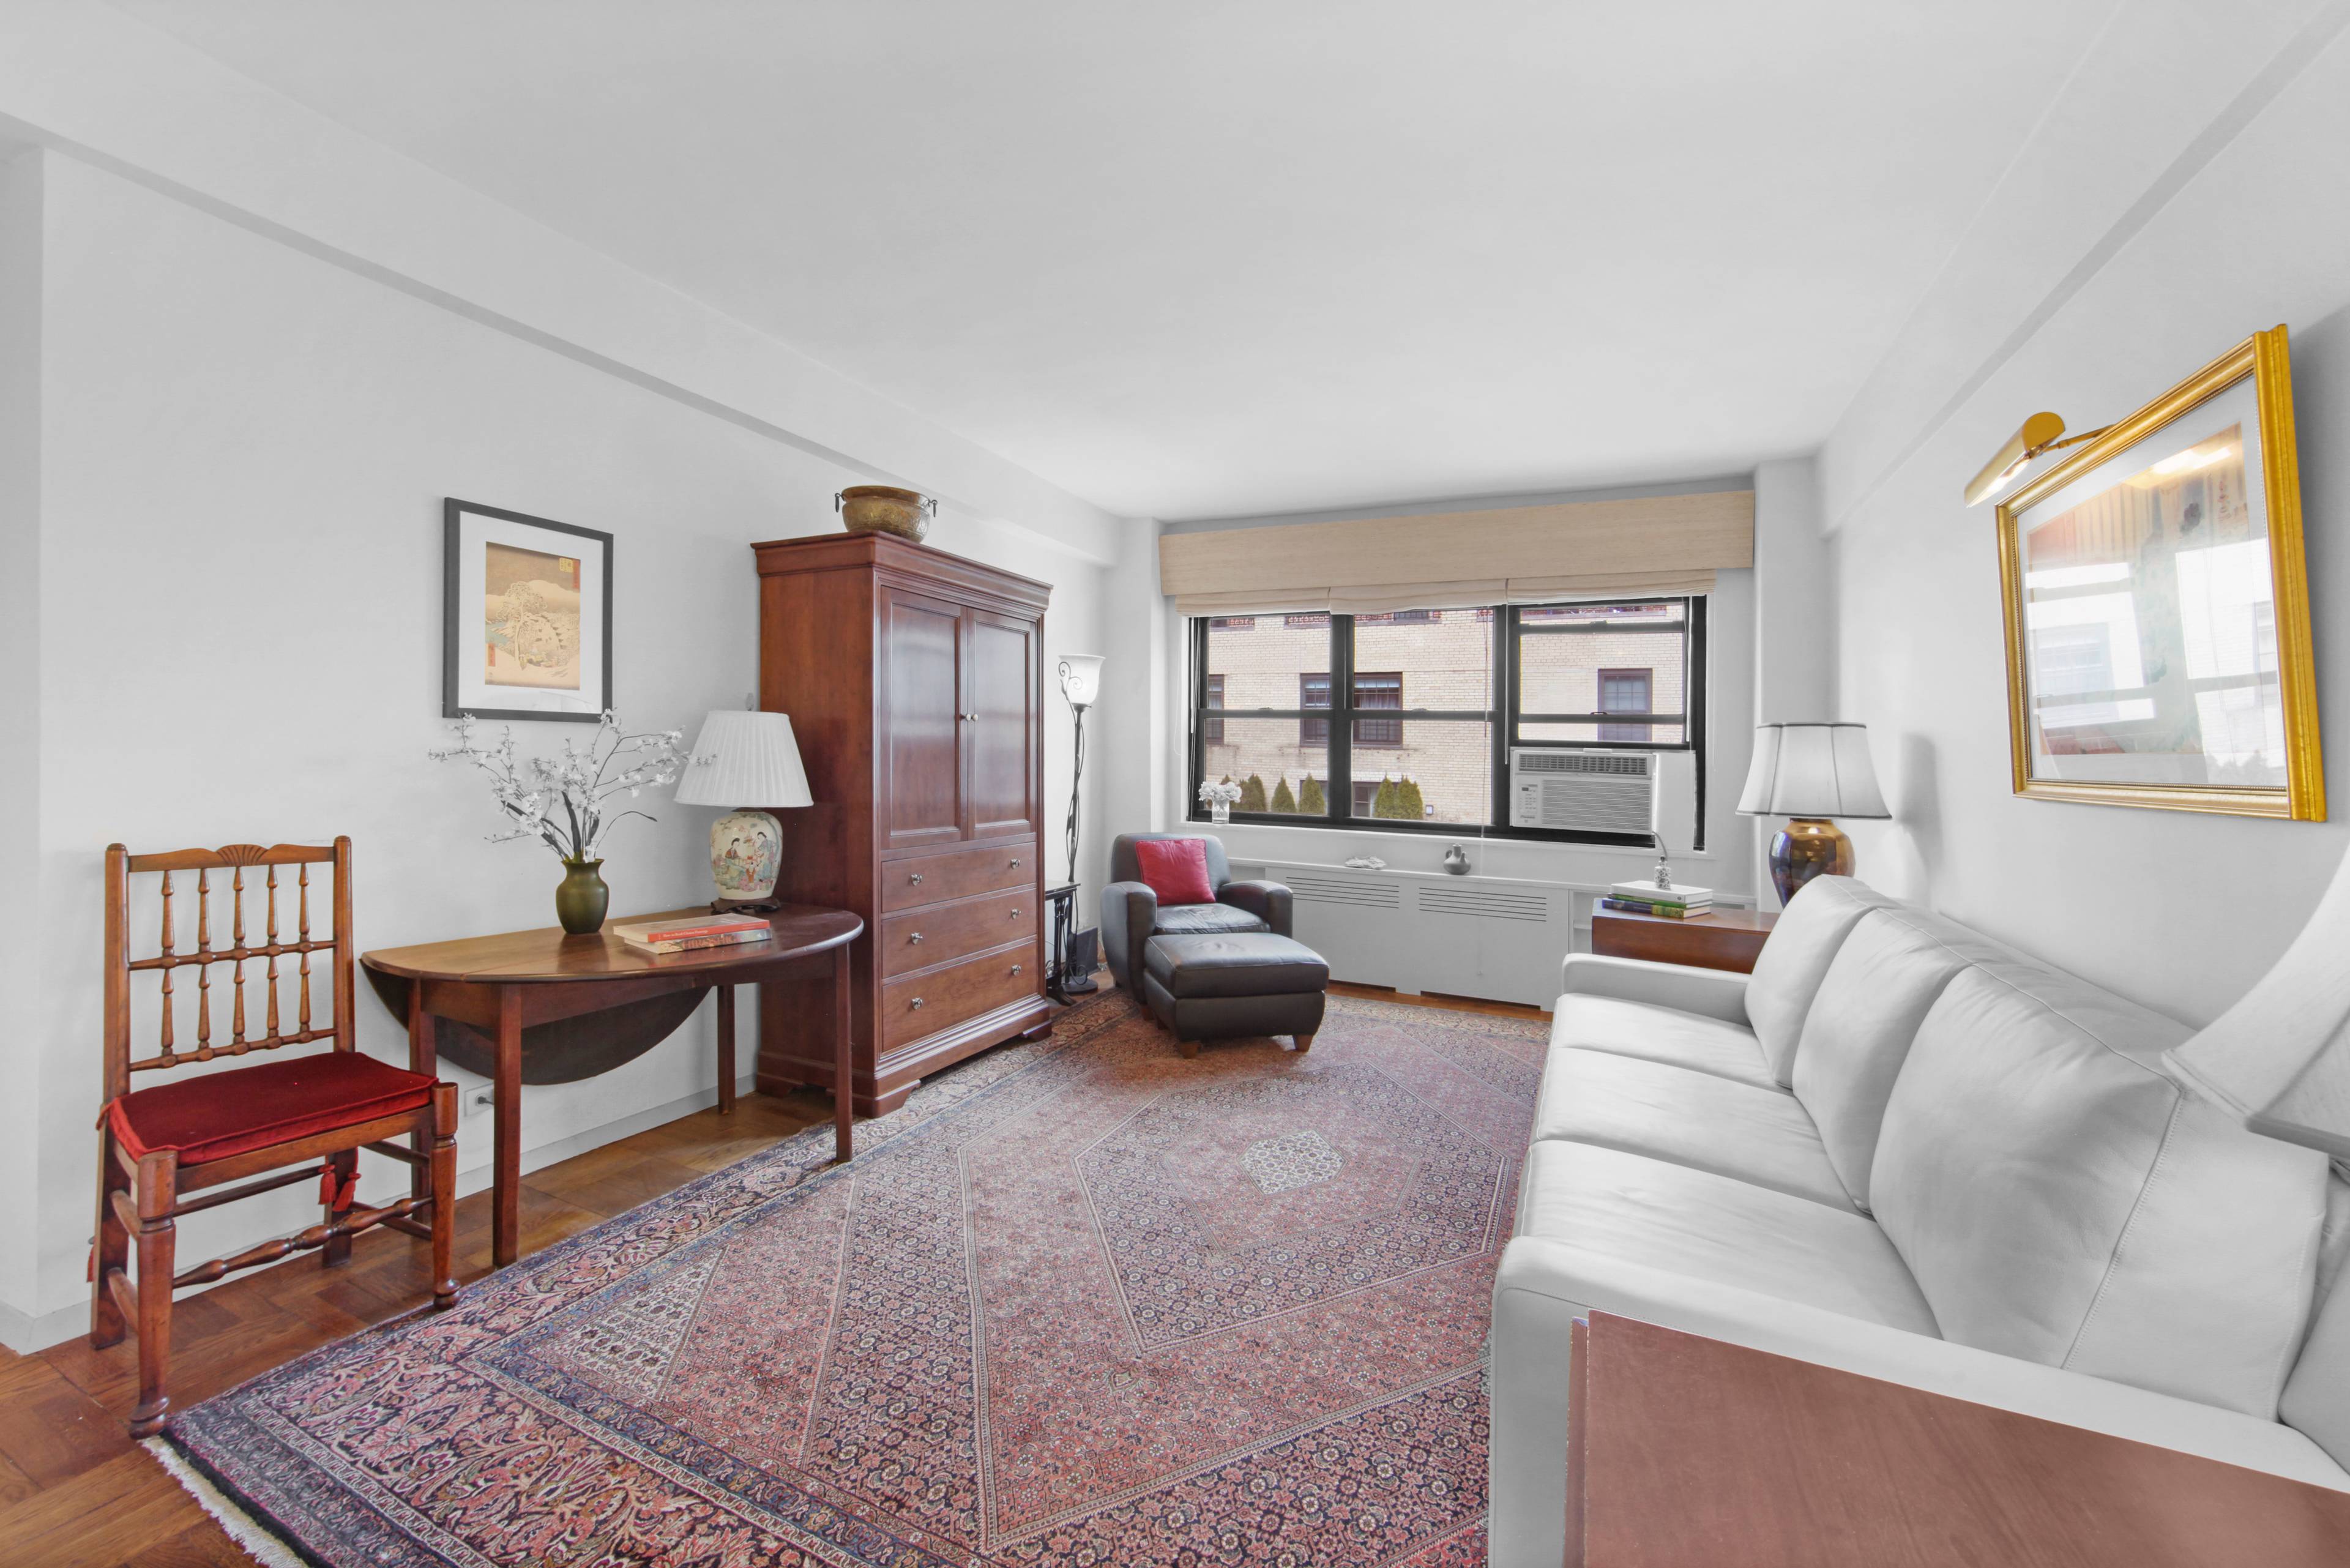 Introducing this exquisite top floor residence on the A line, nestled in the prestigious enclave of Carnegie Hill, within the Upper East Side.